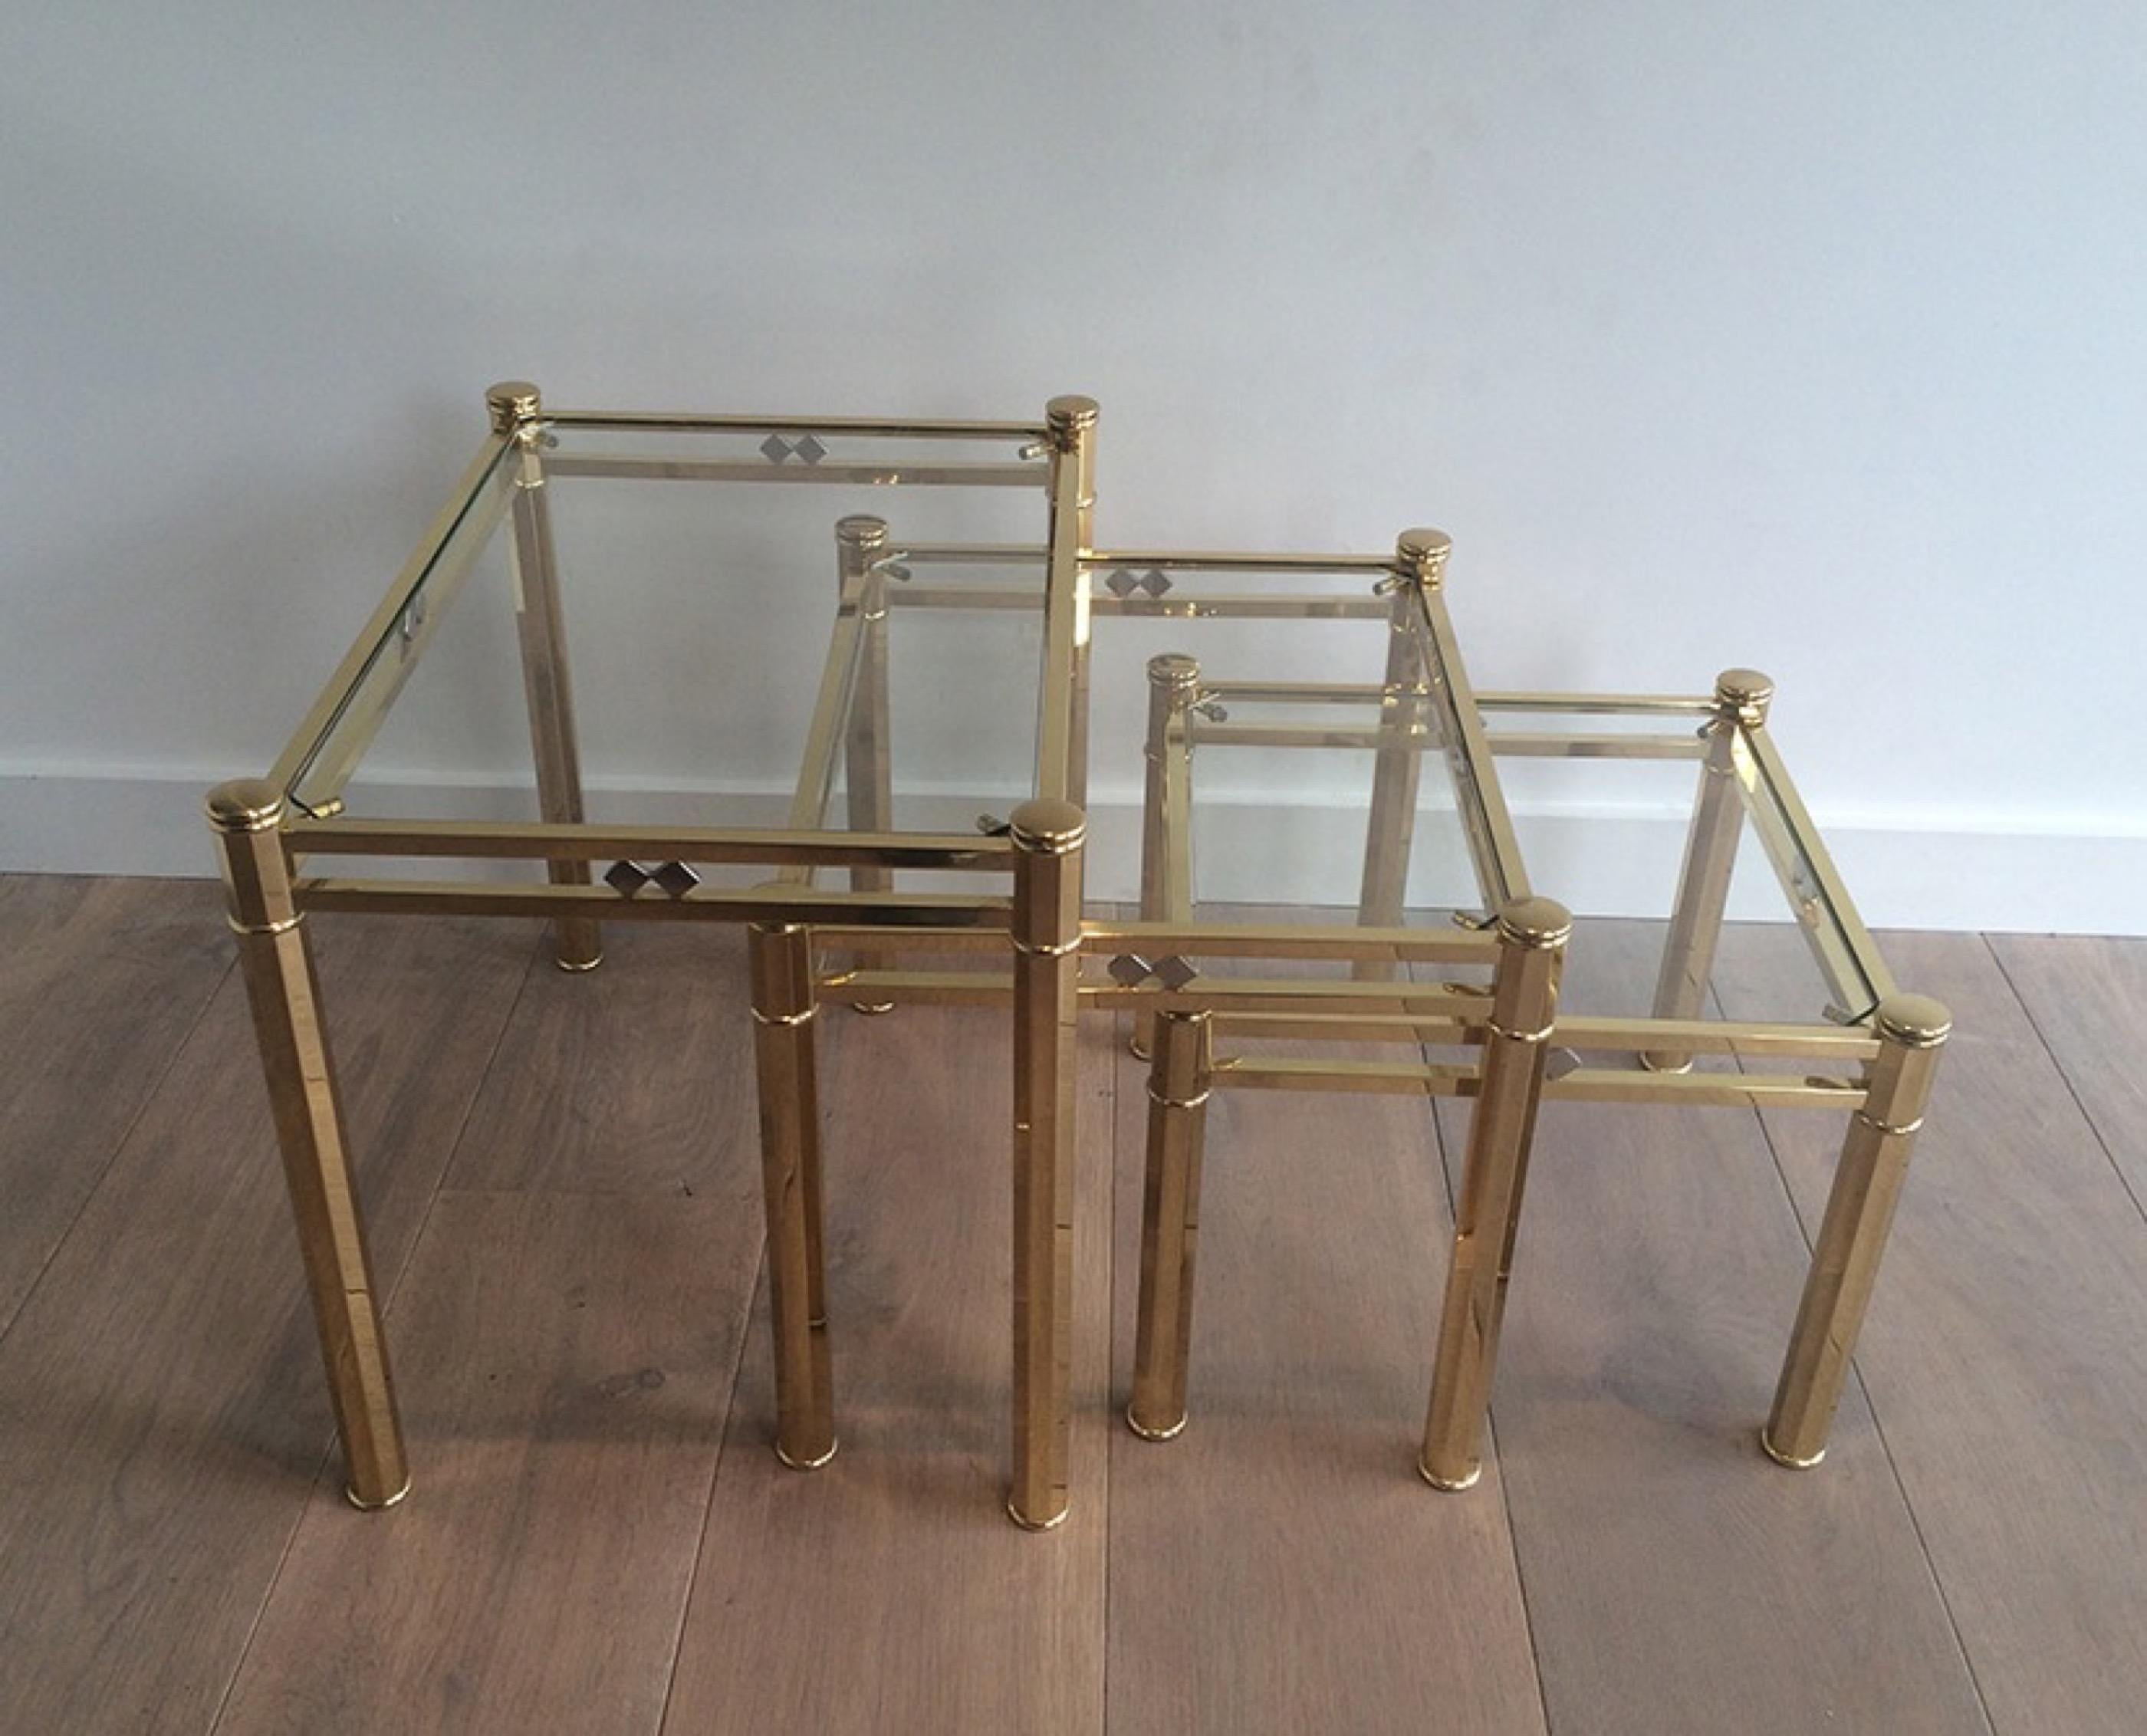 Set of 3 Decorative Brass Nesting Tables, circa 1970 For Sale 5